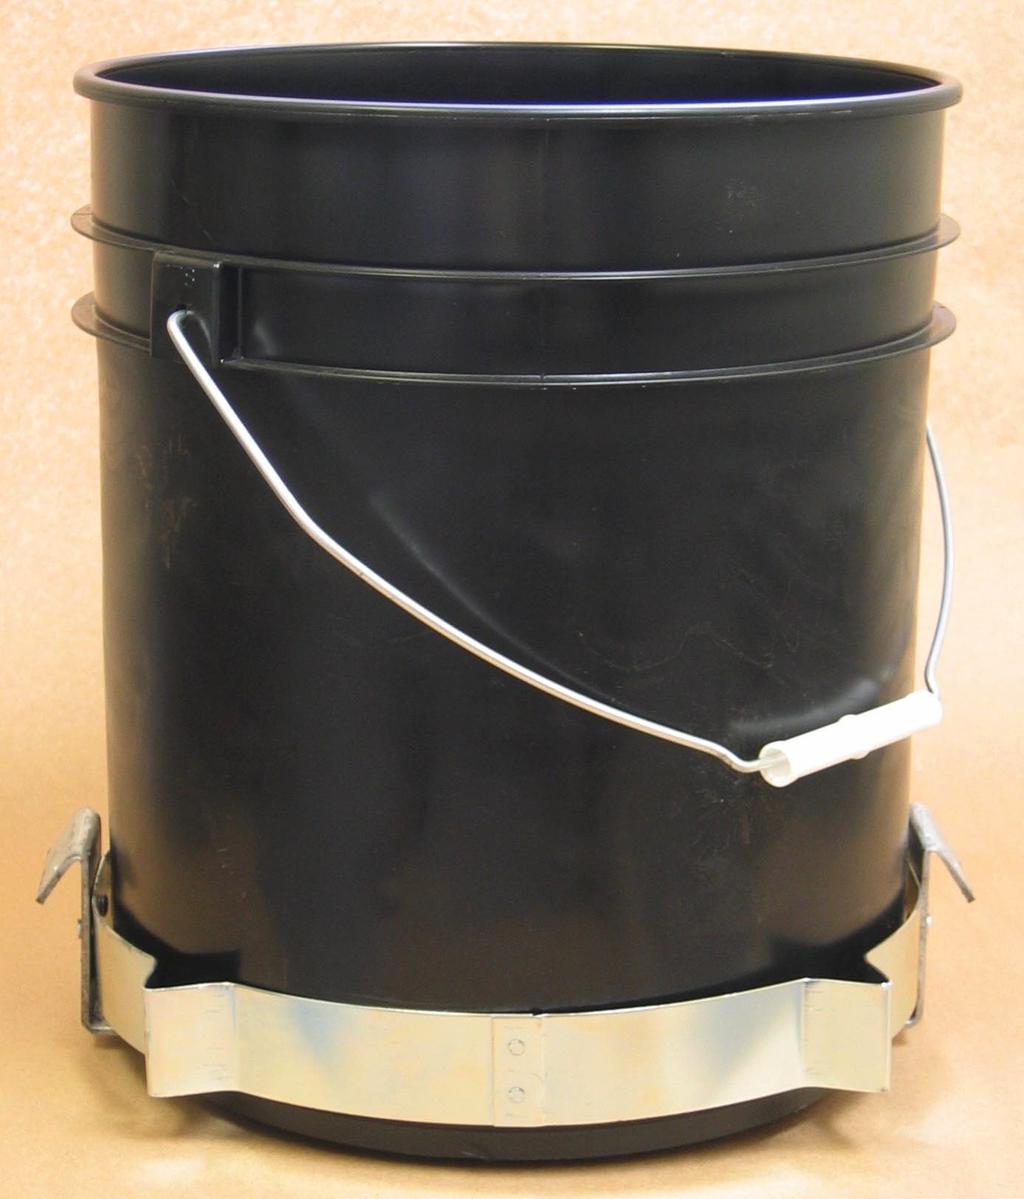 When the pail is about half empty it should be removed from the canister and the centering ring turned over so that the pail is sitting elevated 3